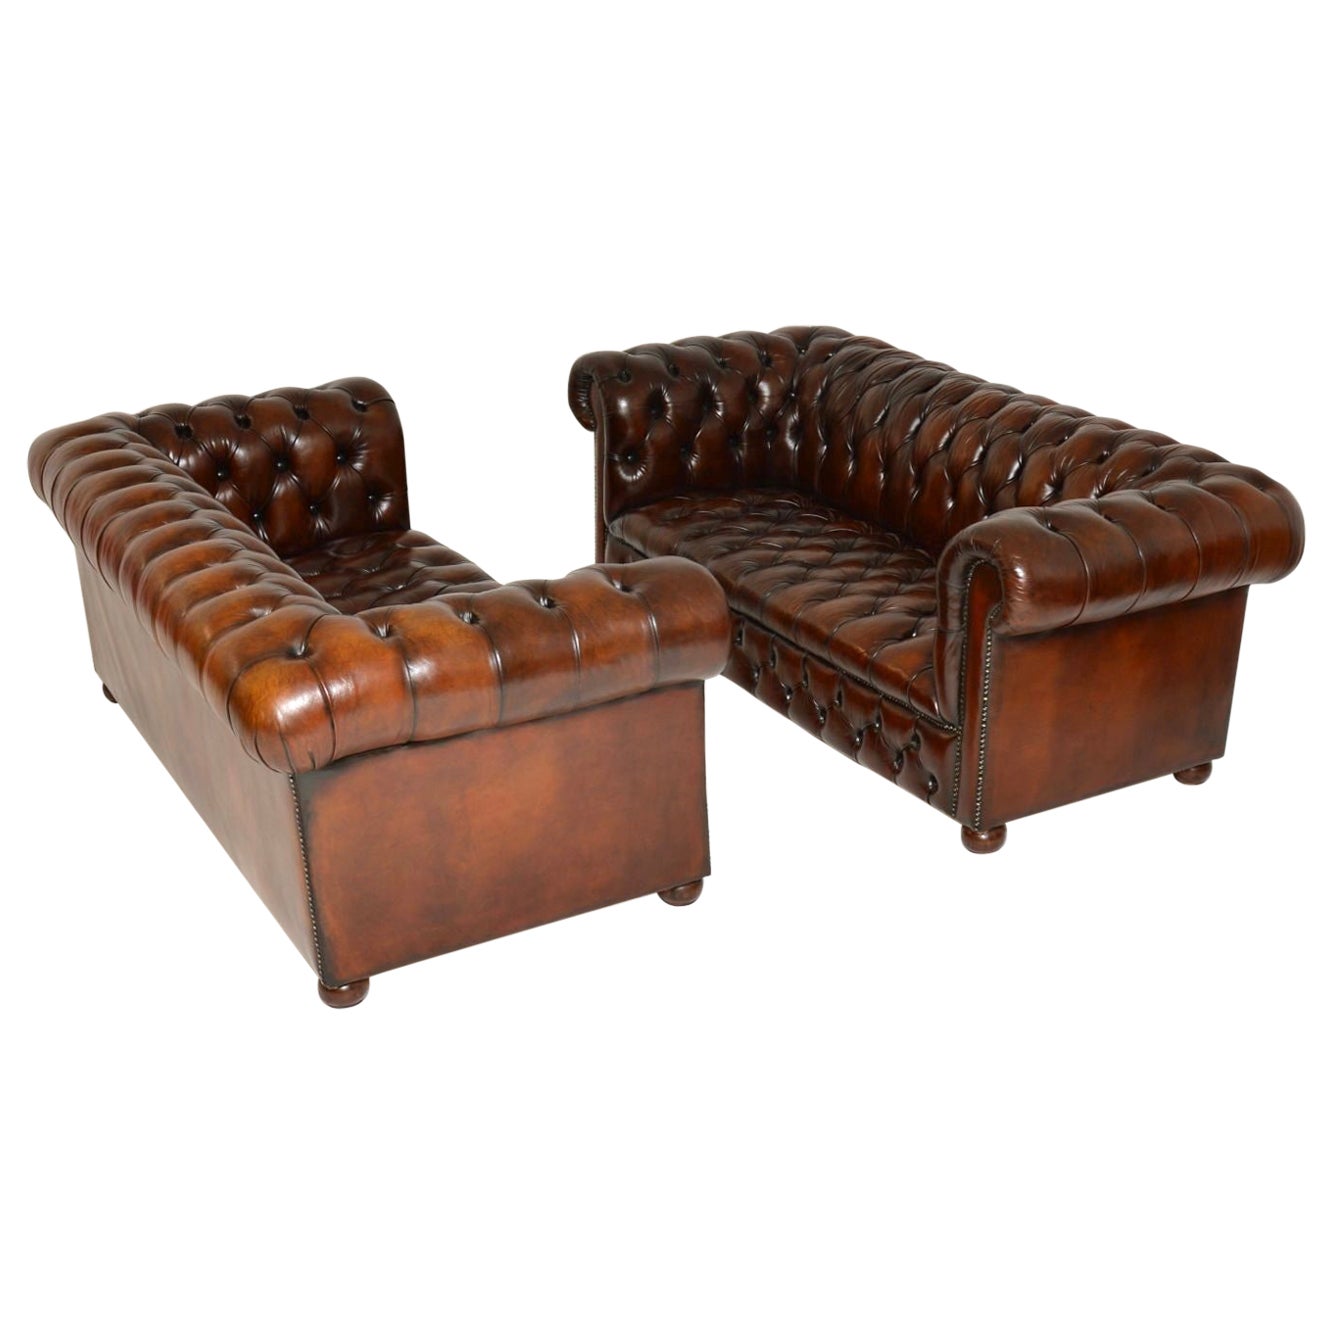 Pair of Antique Leather Chesterfield Sofas